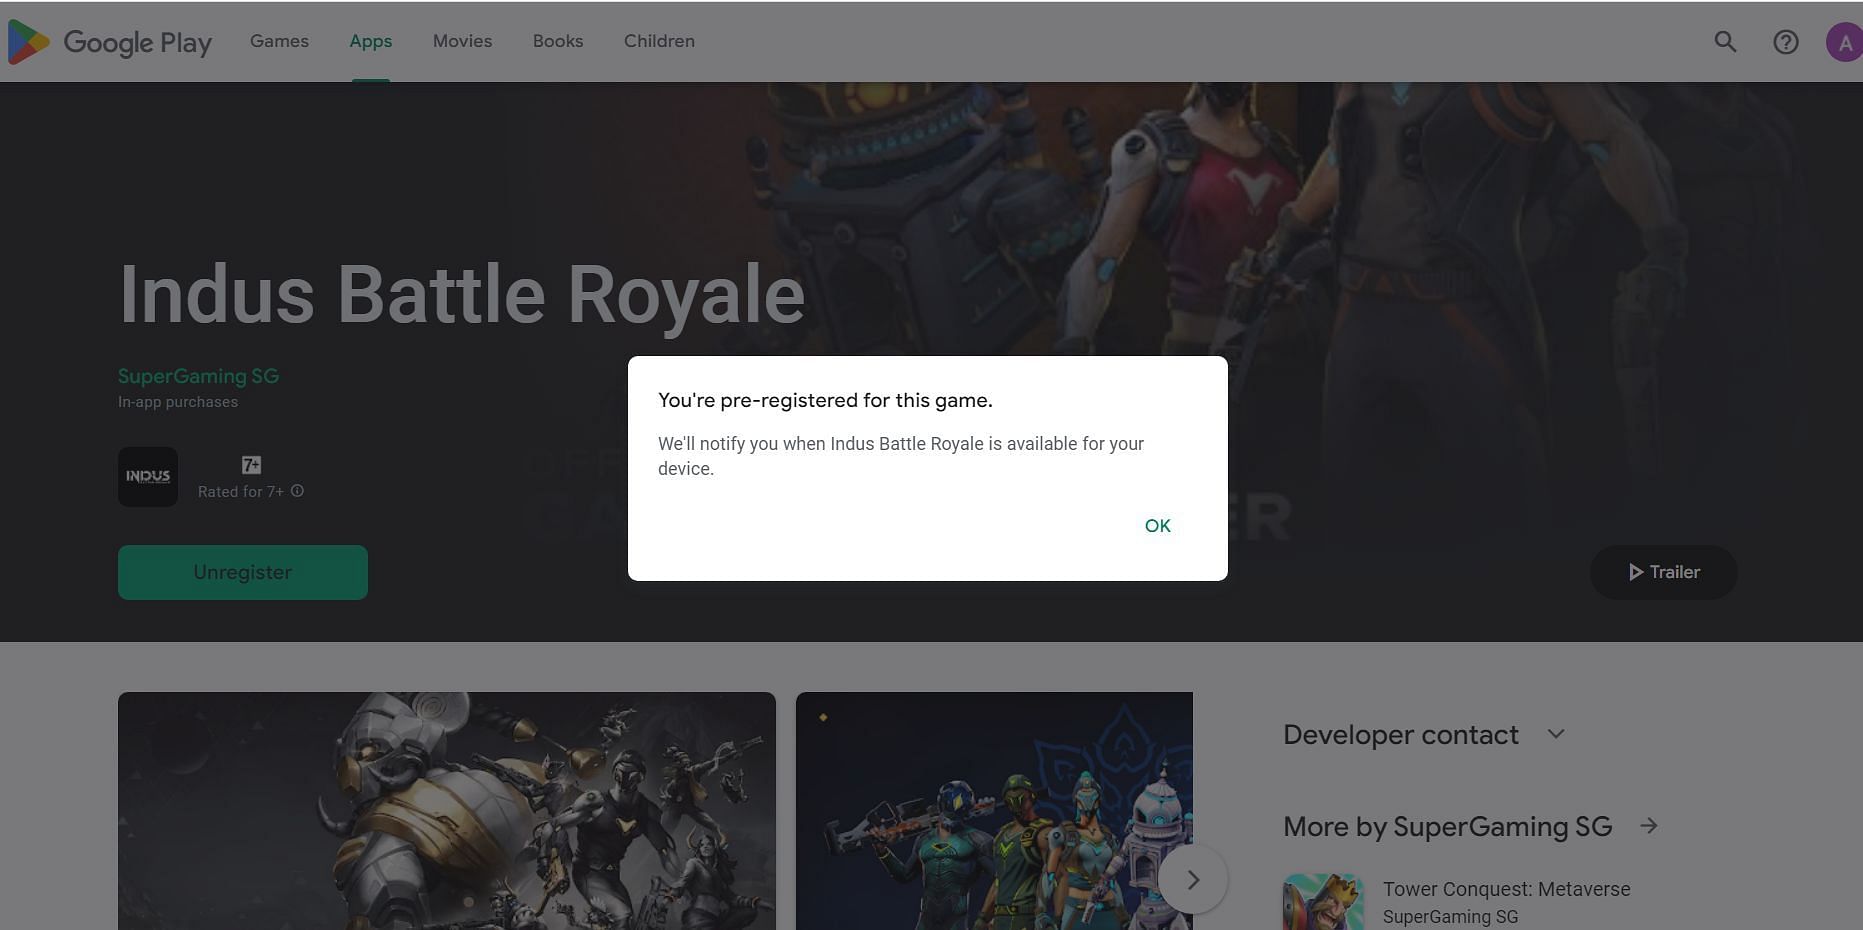 Learn how to pre-register for Indus Battle Royale on Google Play Retailer